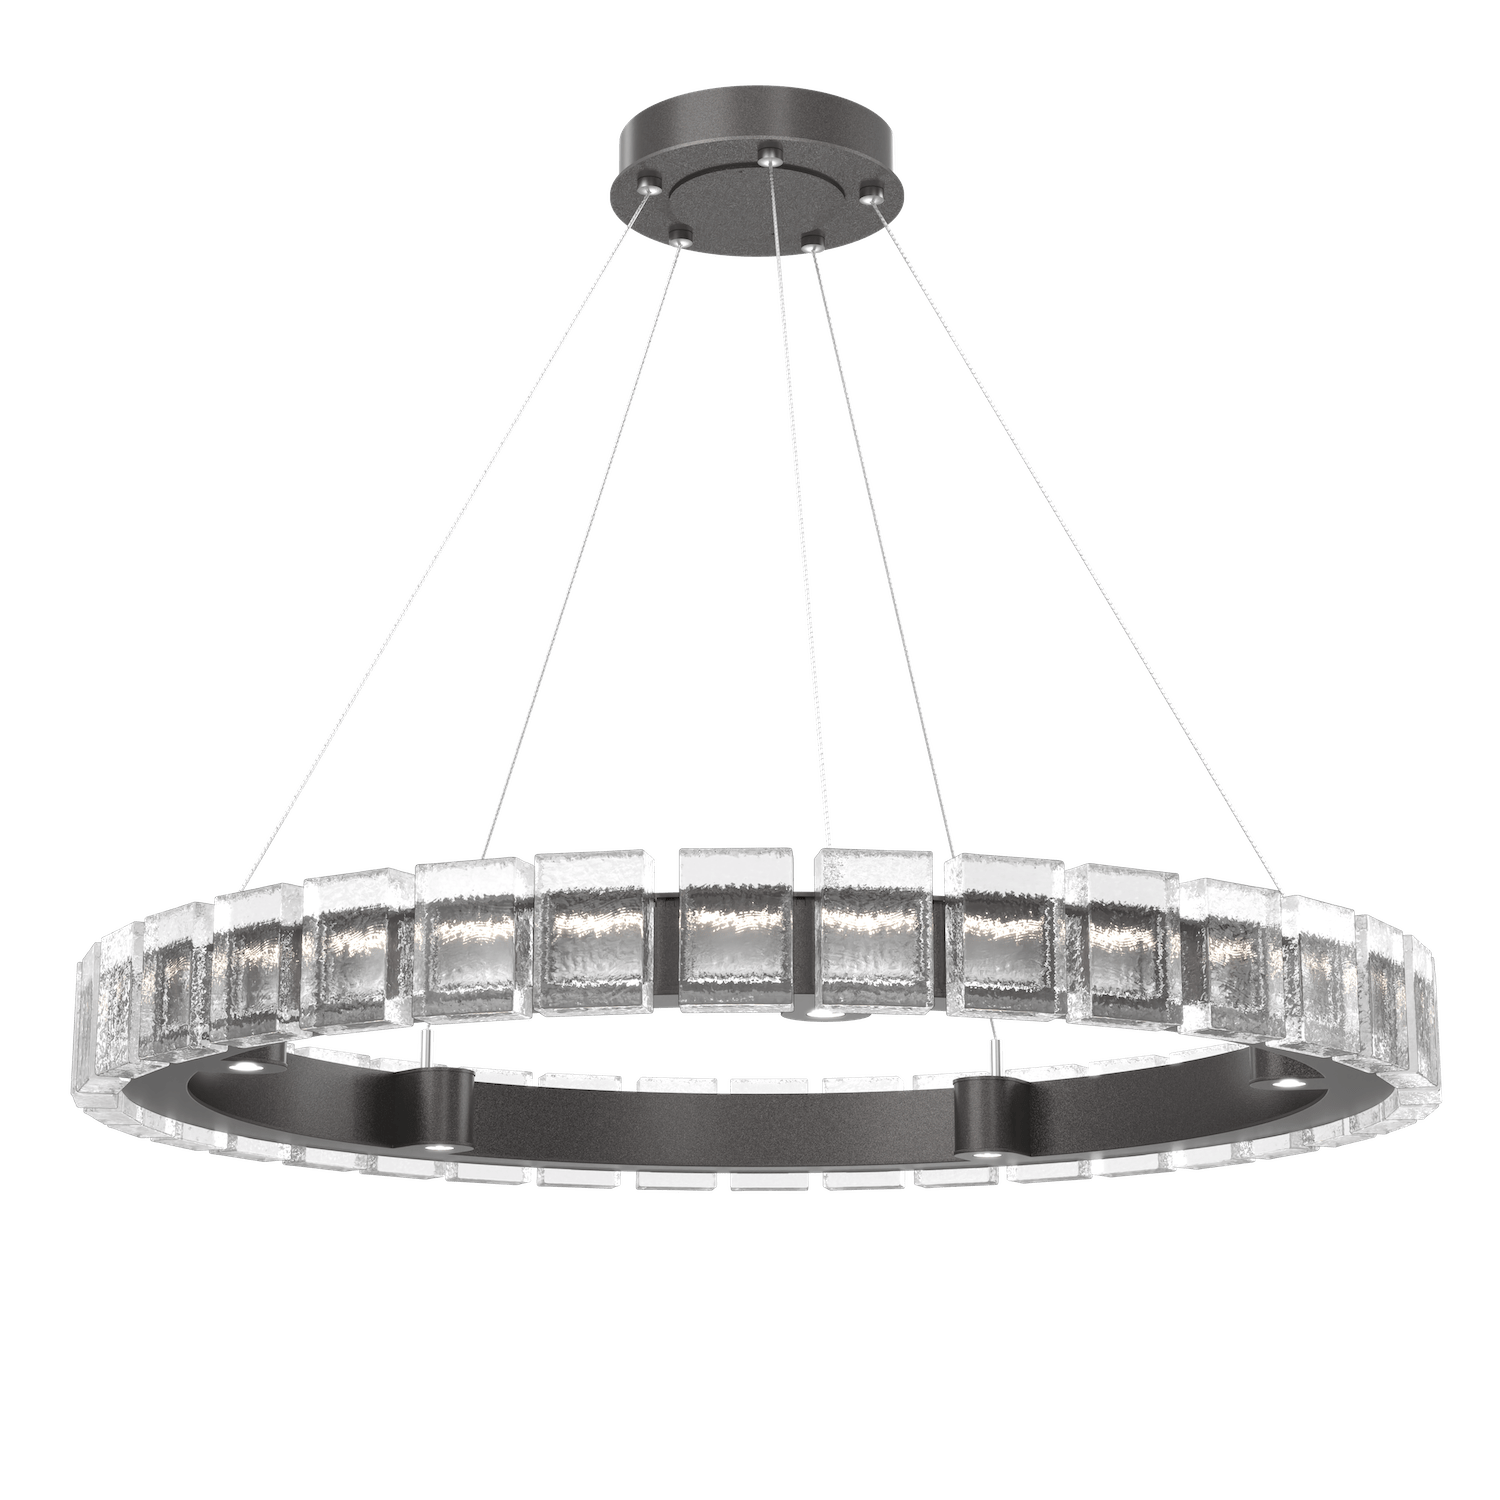 CHB0087-38-GP-TP-Hammerton-Studio-Tessera-38-inch-ring-chandelier-with-graphite-finish-and-clear-pave-cast-glass-shade-and-LED-lamping